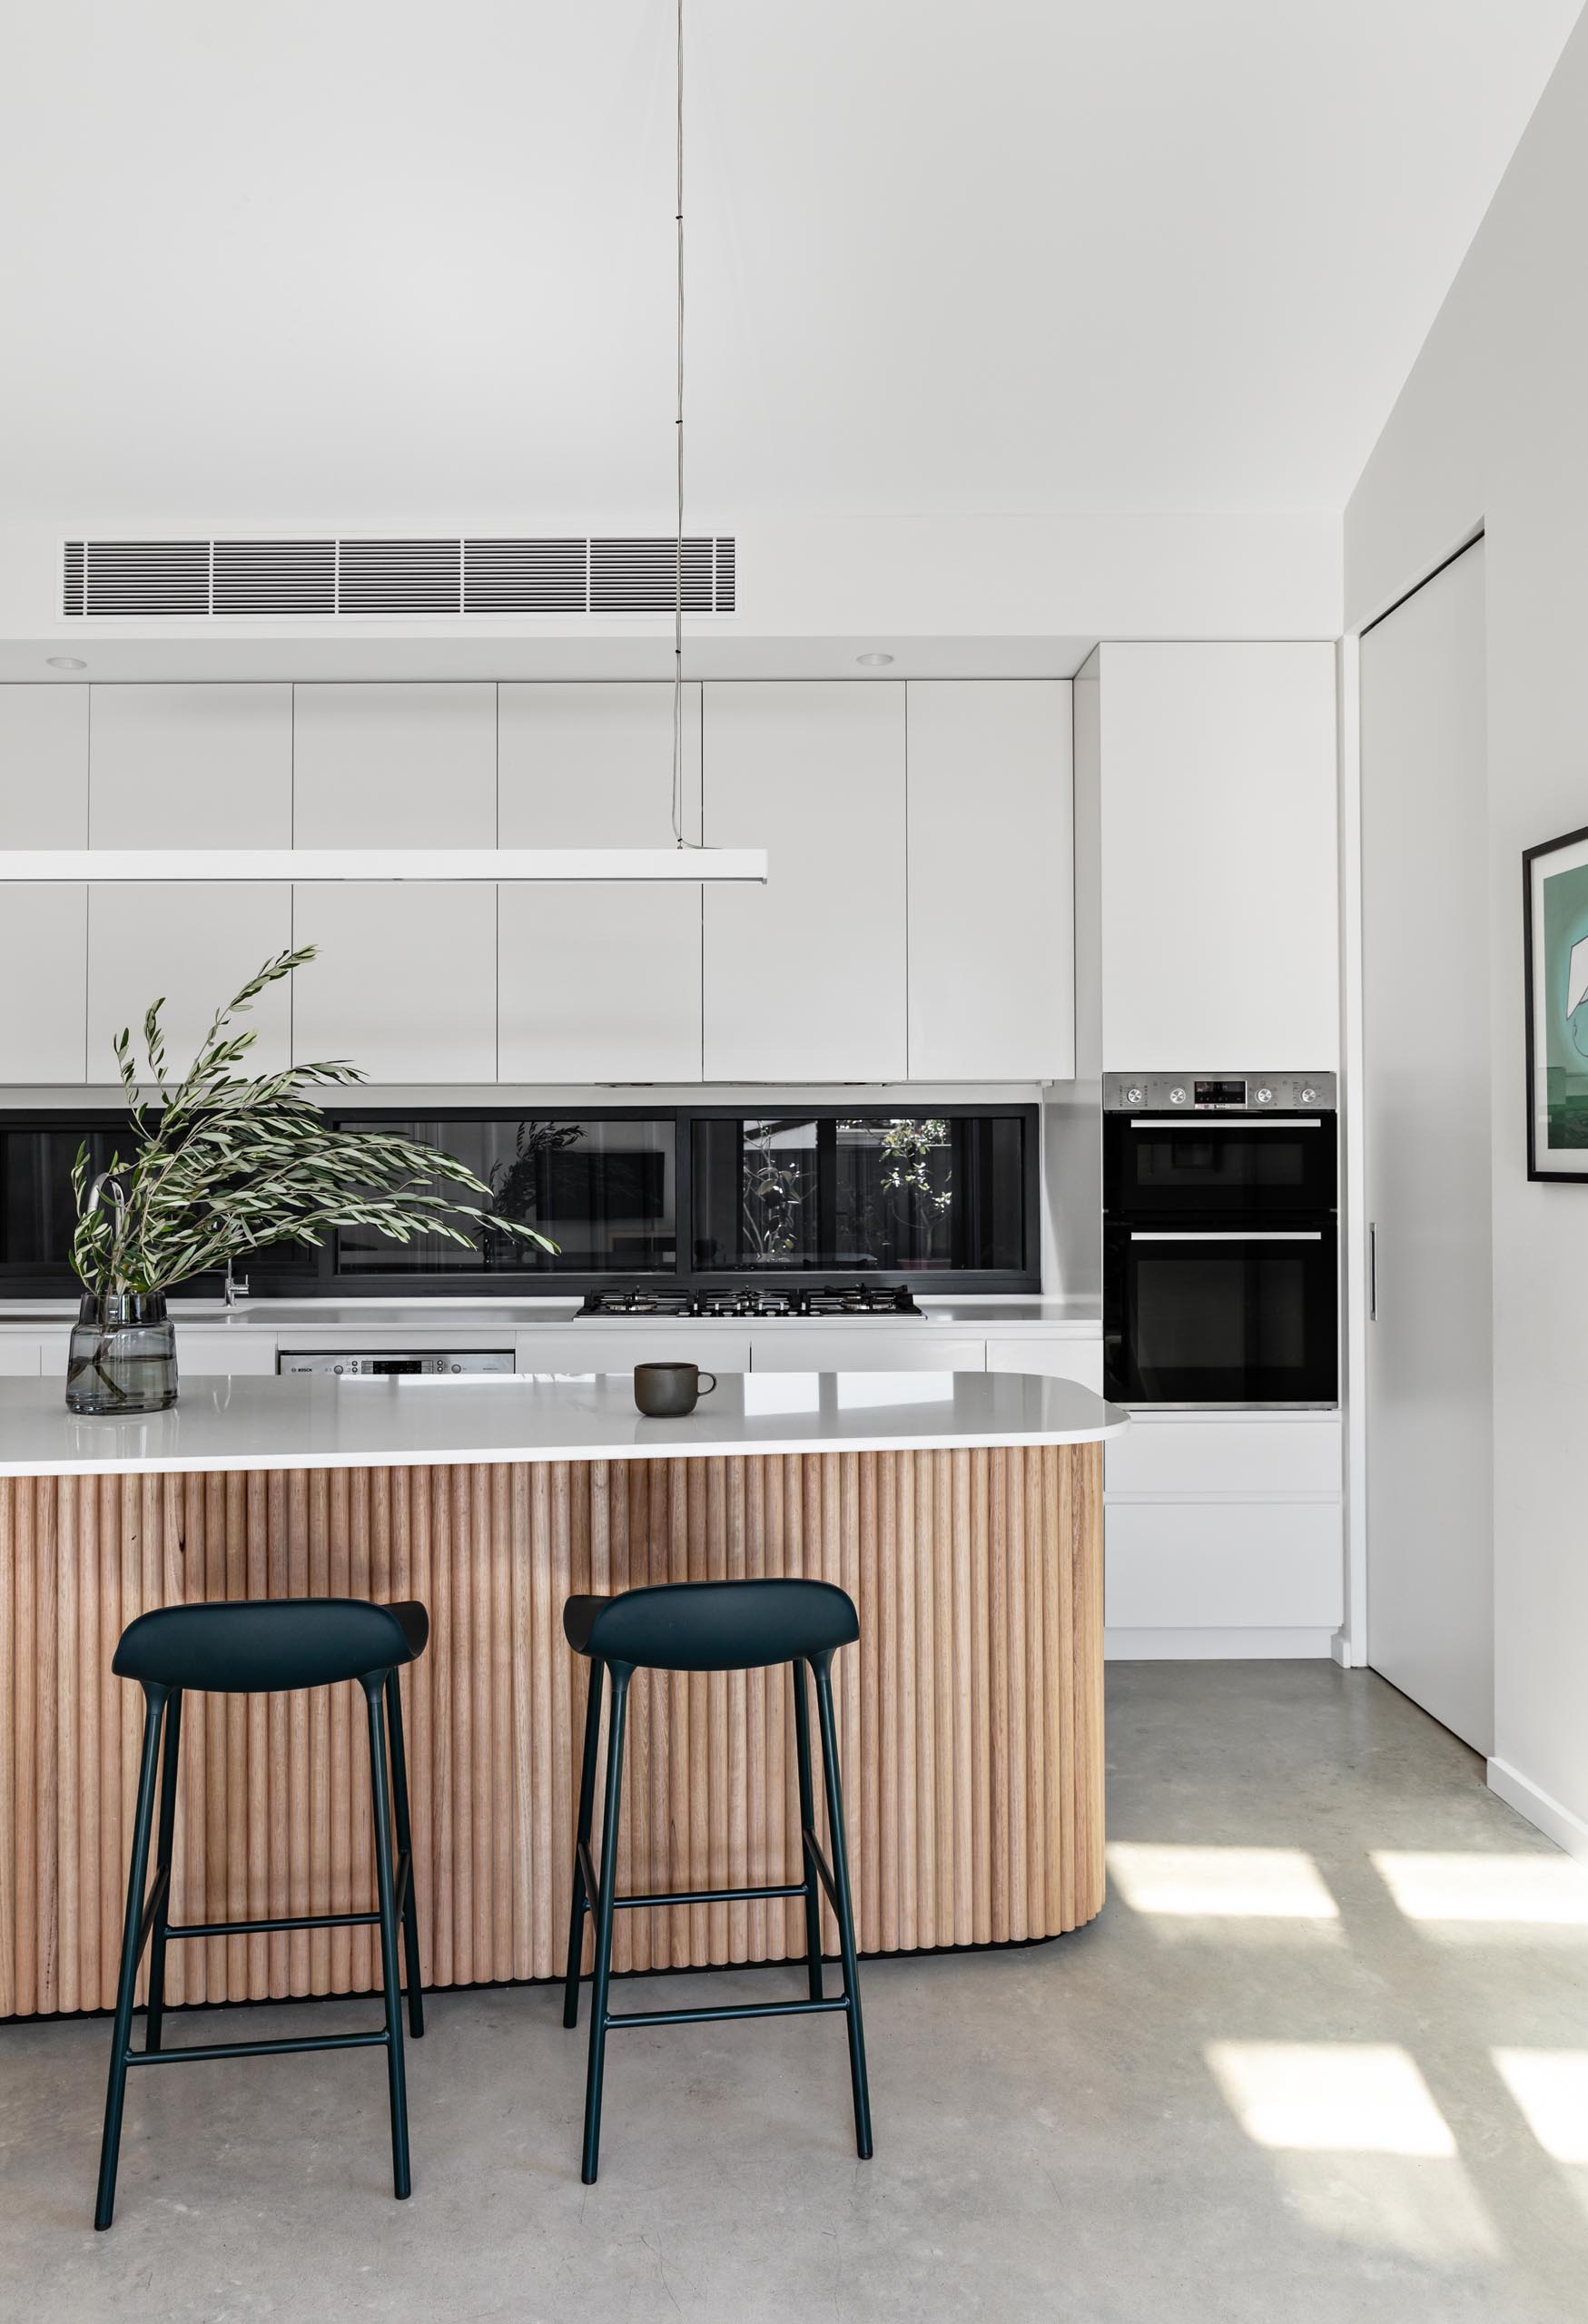 In this modern kitchen, there's minimalist white cabinets, concrete floors, a glass backsplash, and an island with wood facade.